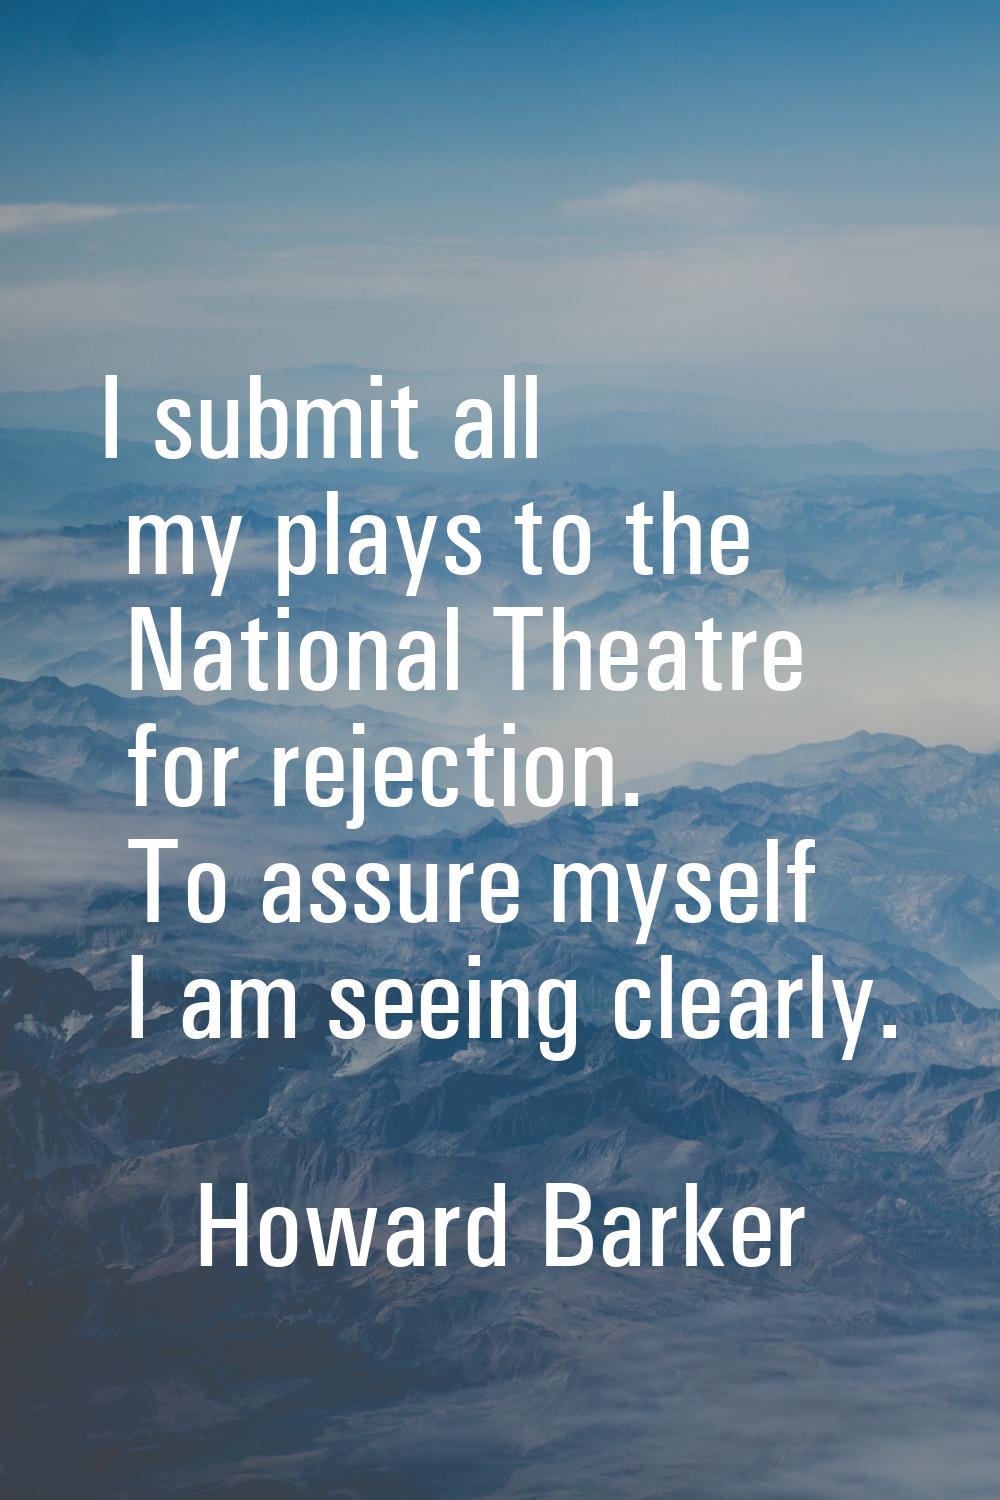 I submit all my plays to the National Theatre for rejection. To assure myself I am seeing clearly.